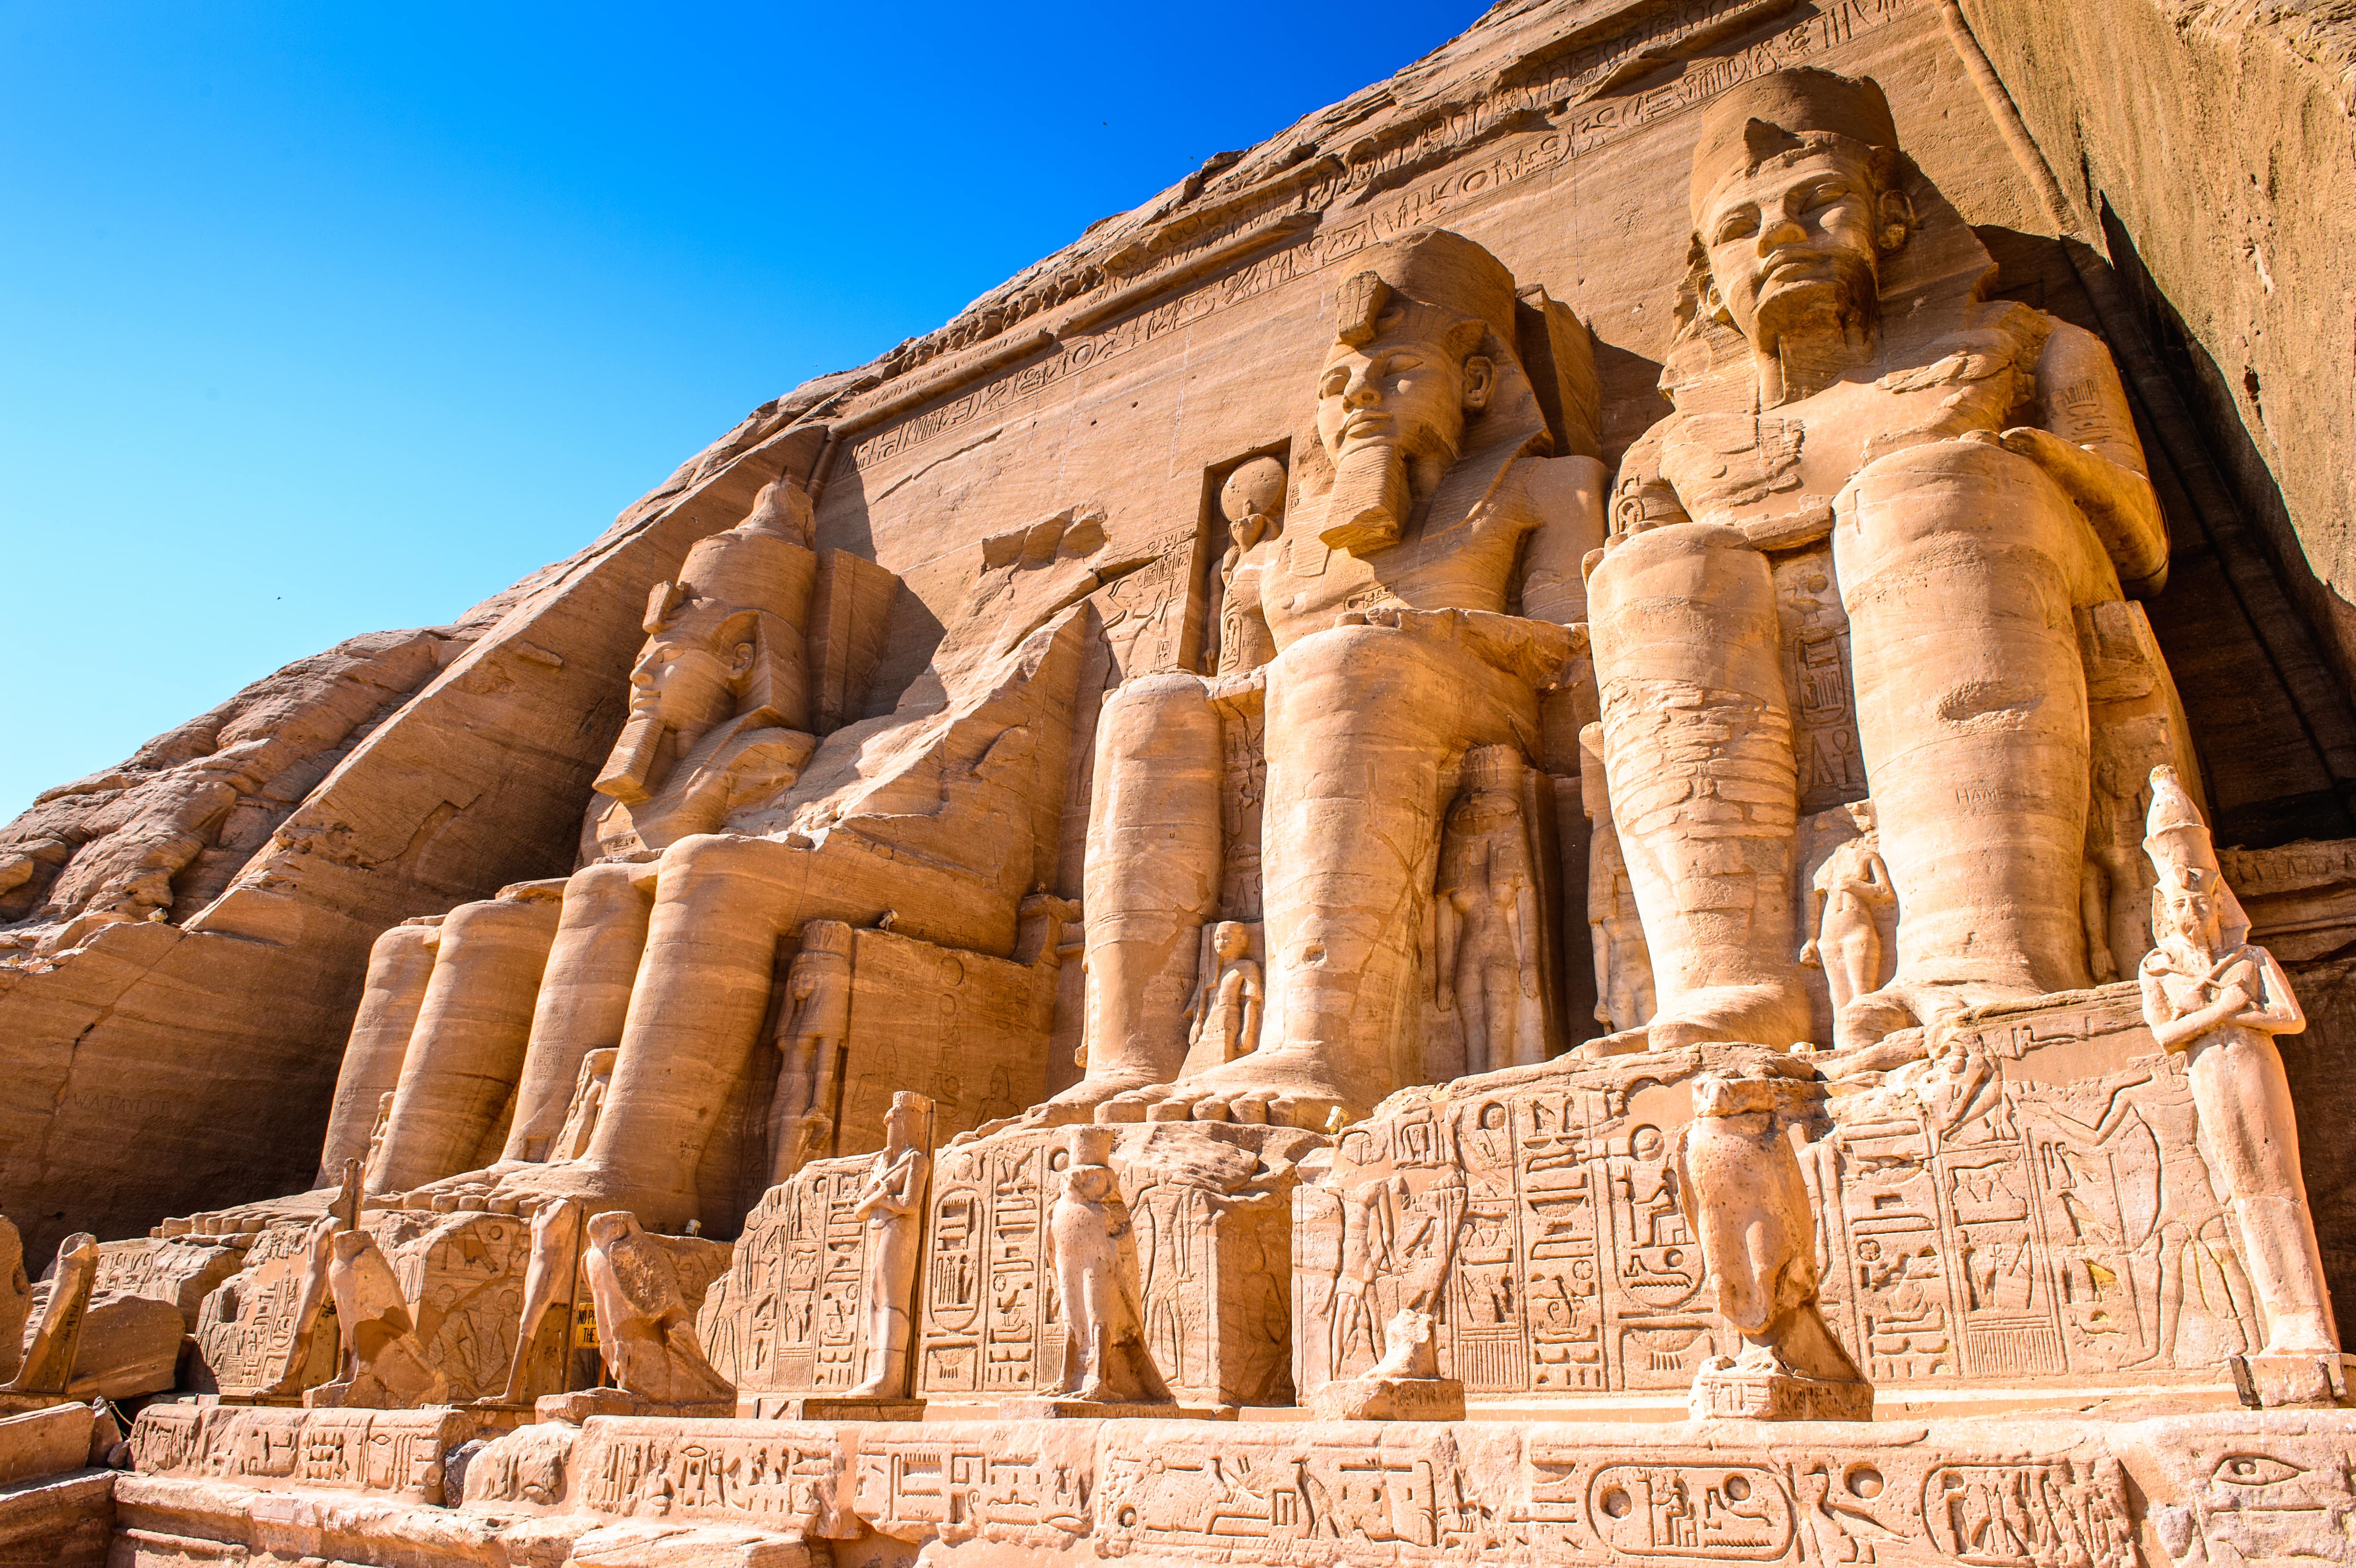 Which area in Egypt does Wendy Wu Tours visit that many other operators do not?